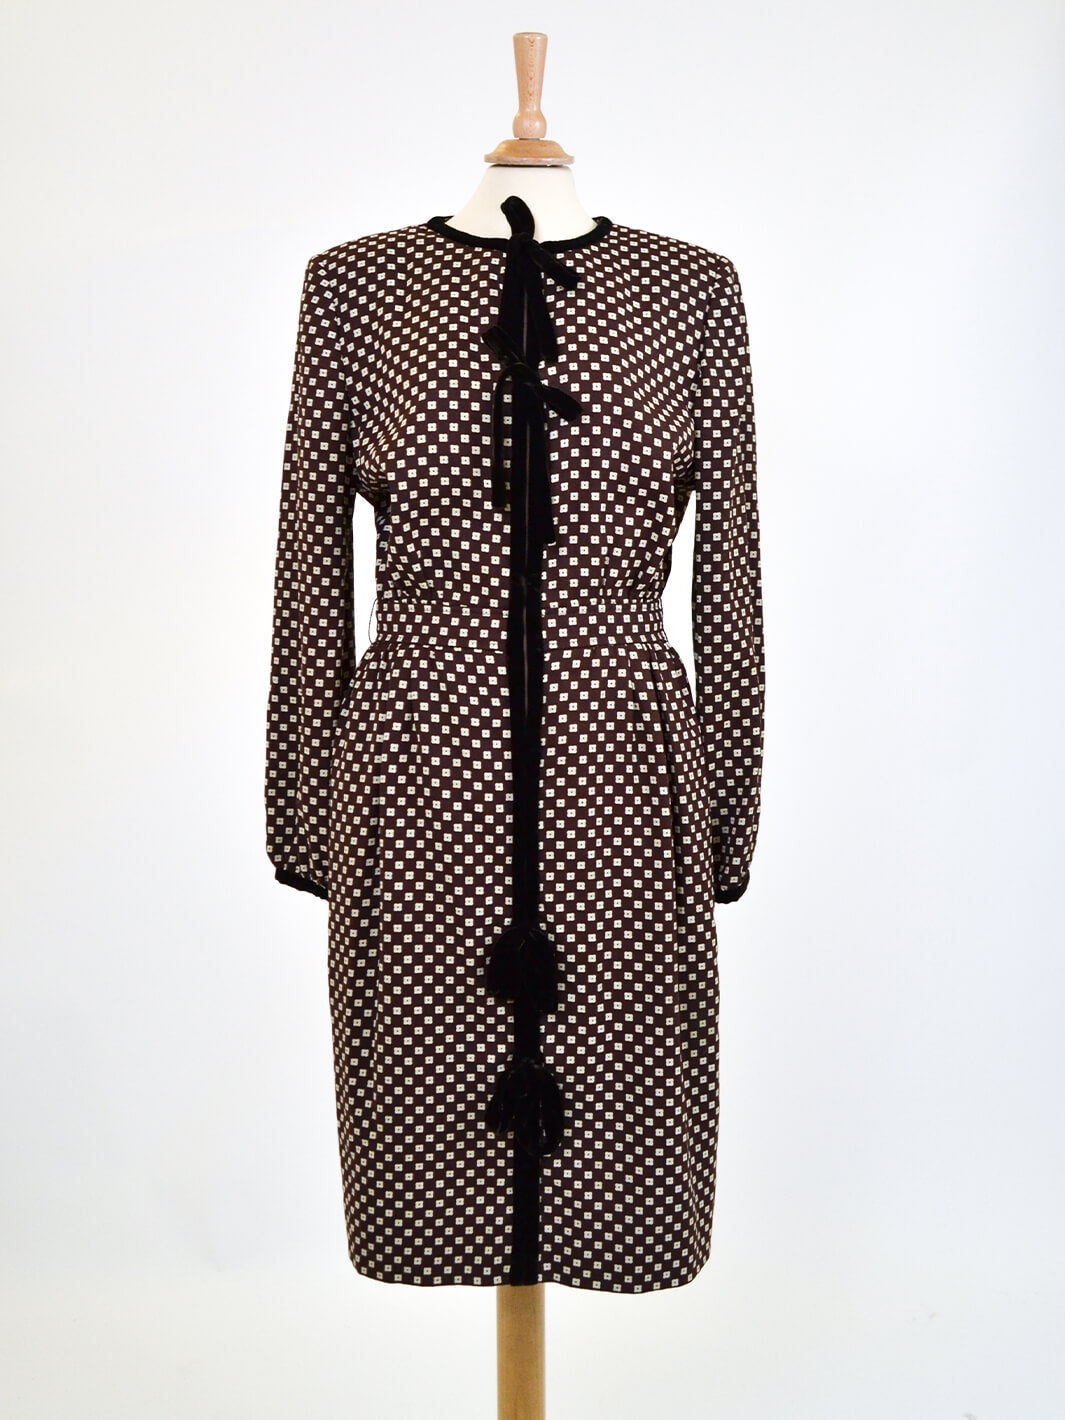 Valentino brown dress with floral beige pattern, 80s